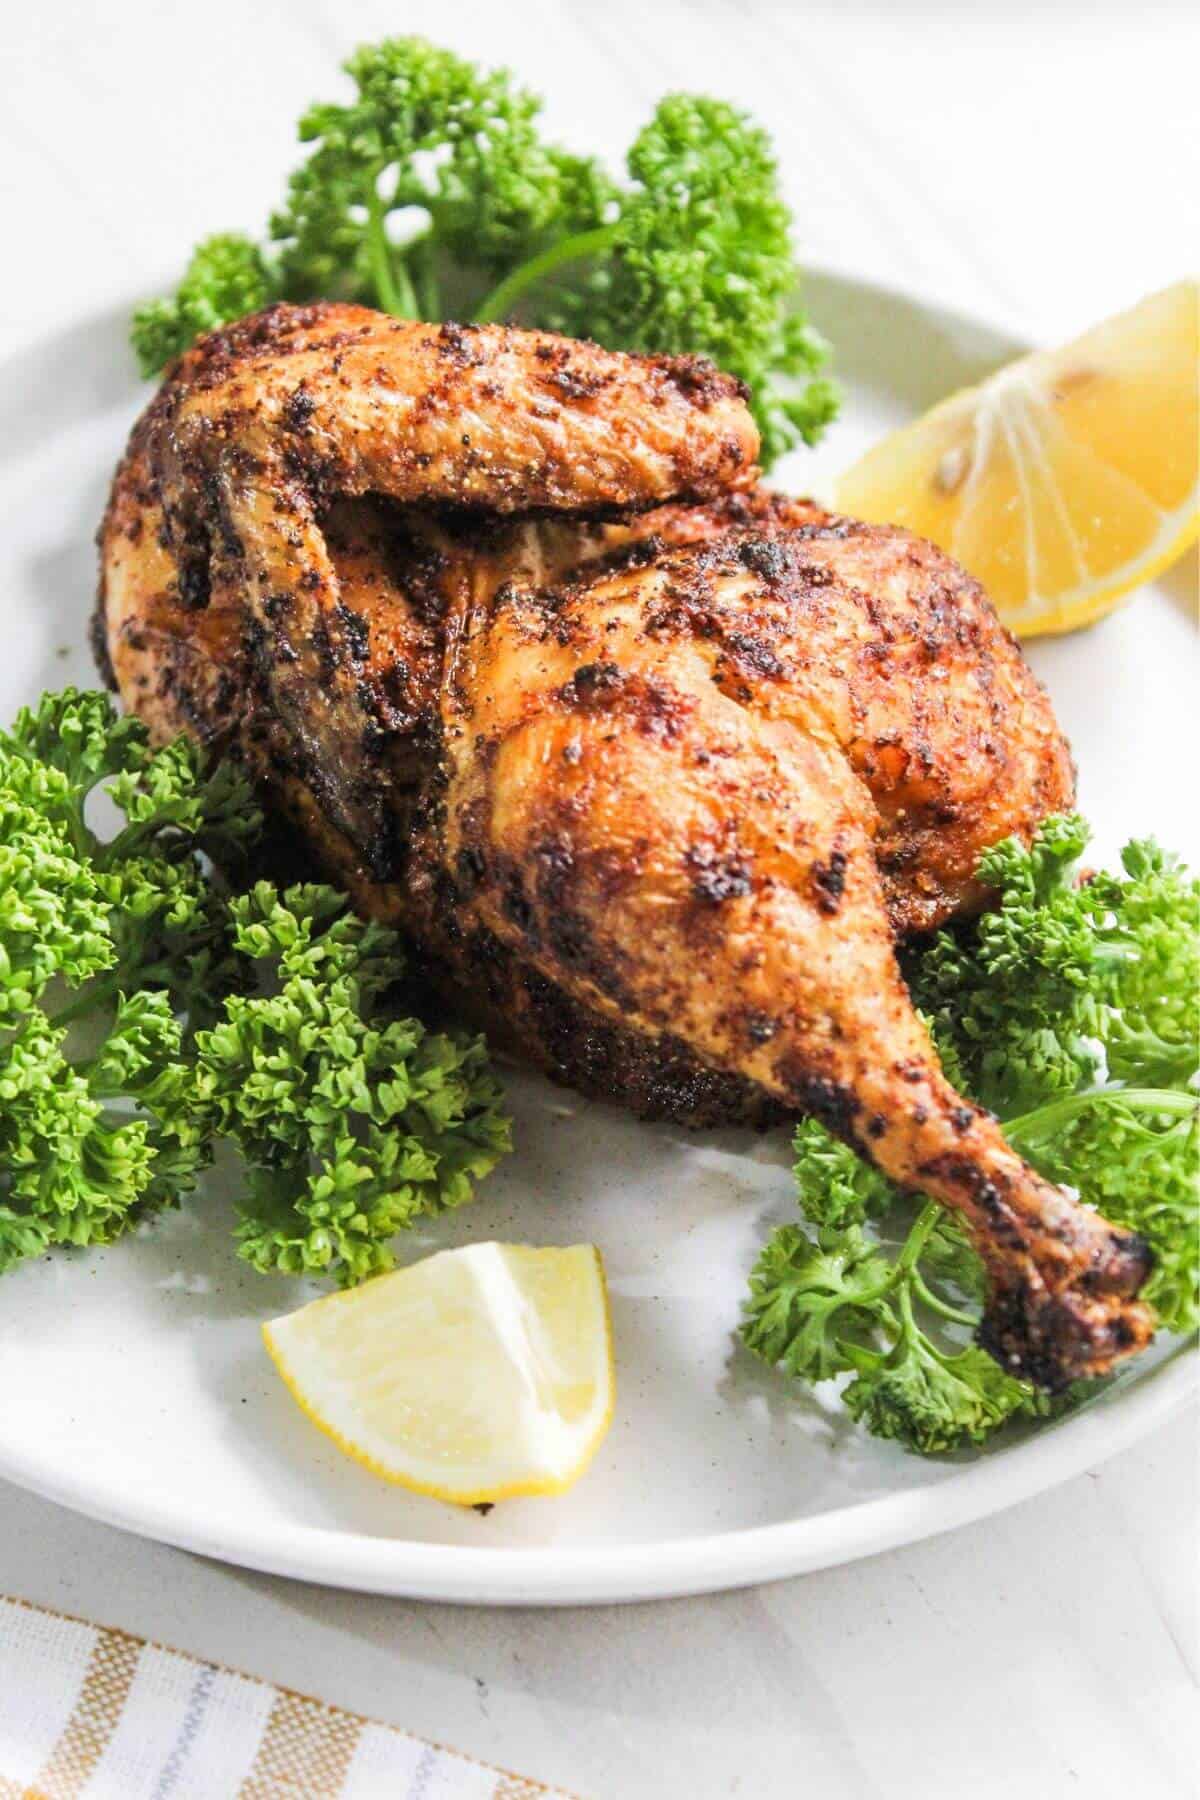 Serving of cornish hen on plate with parsley and lemon wedges.